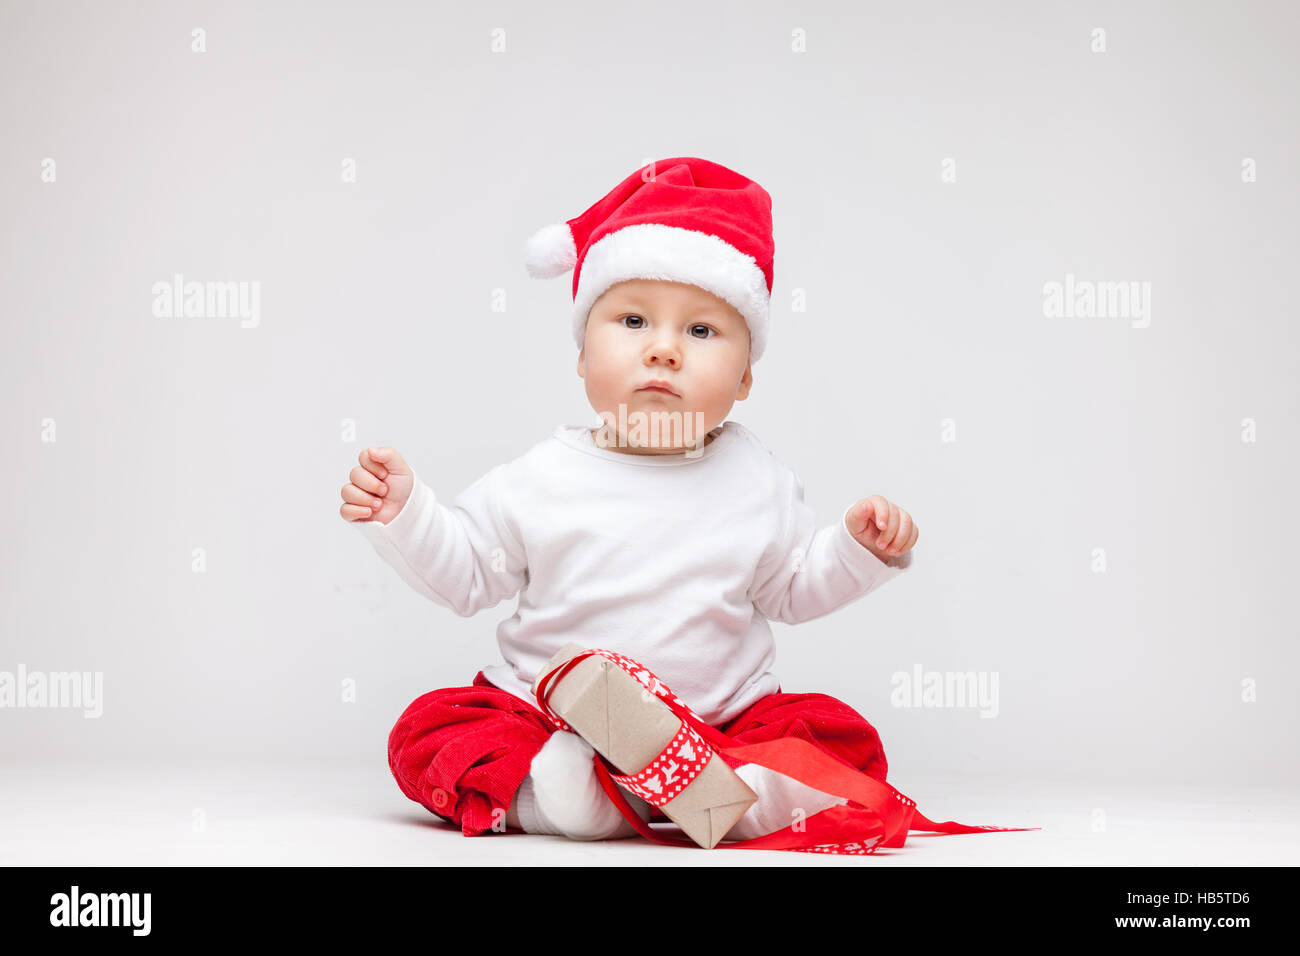 Adorable young baby boy wearing a Santa hat opening Christmas presents Stock Photo